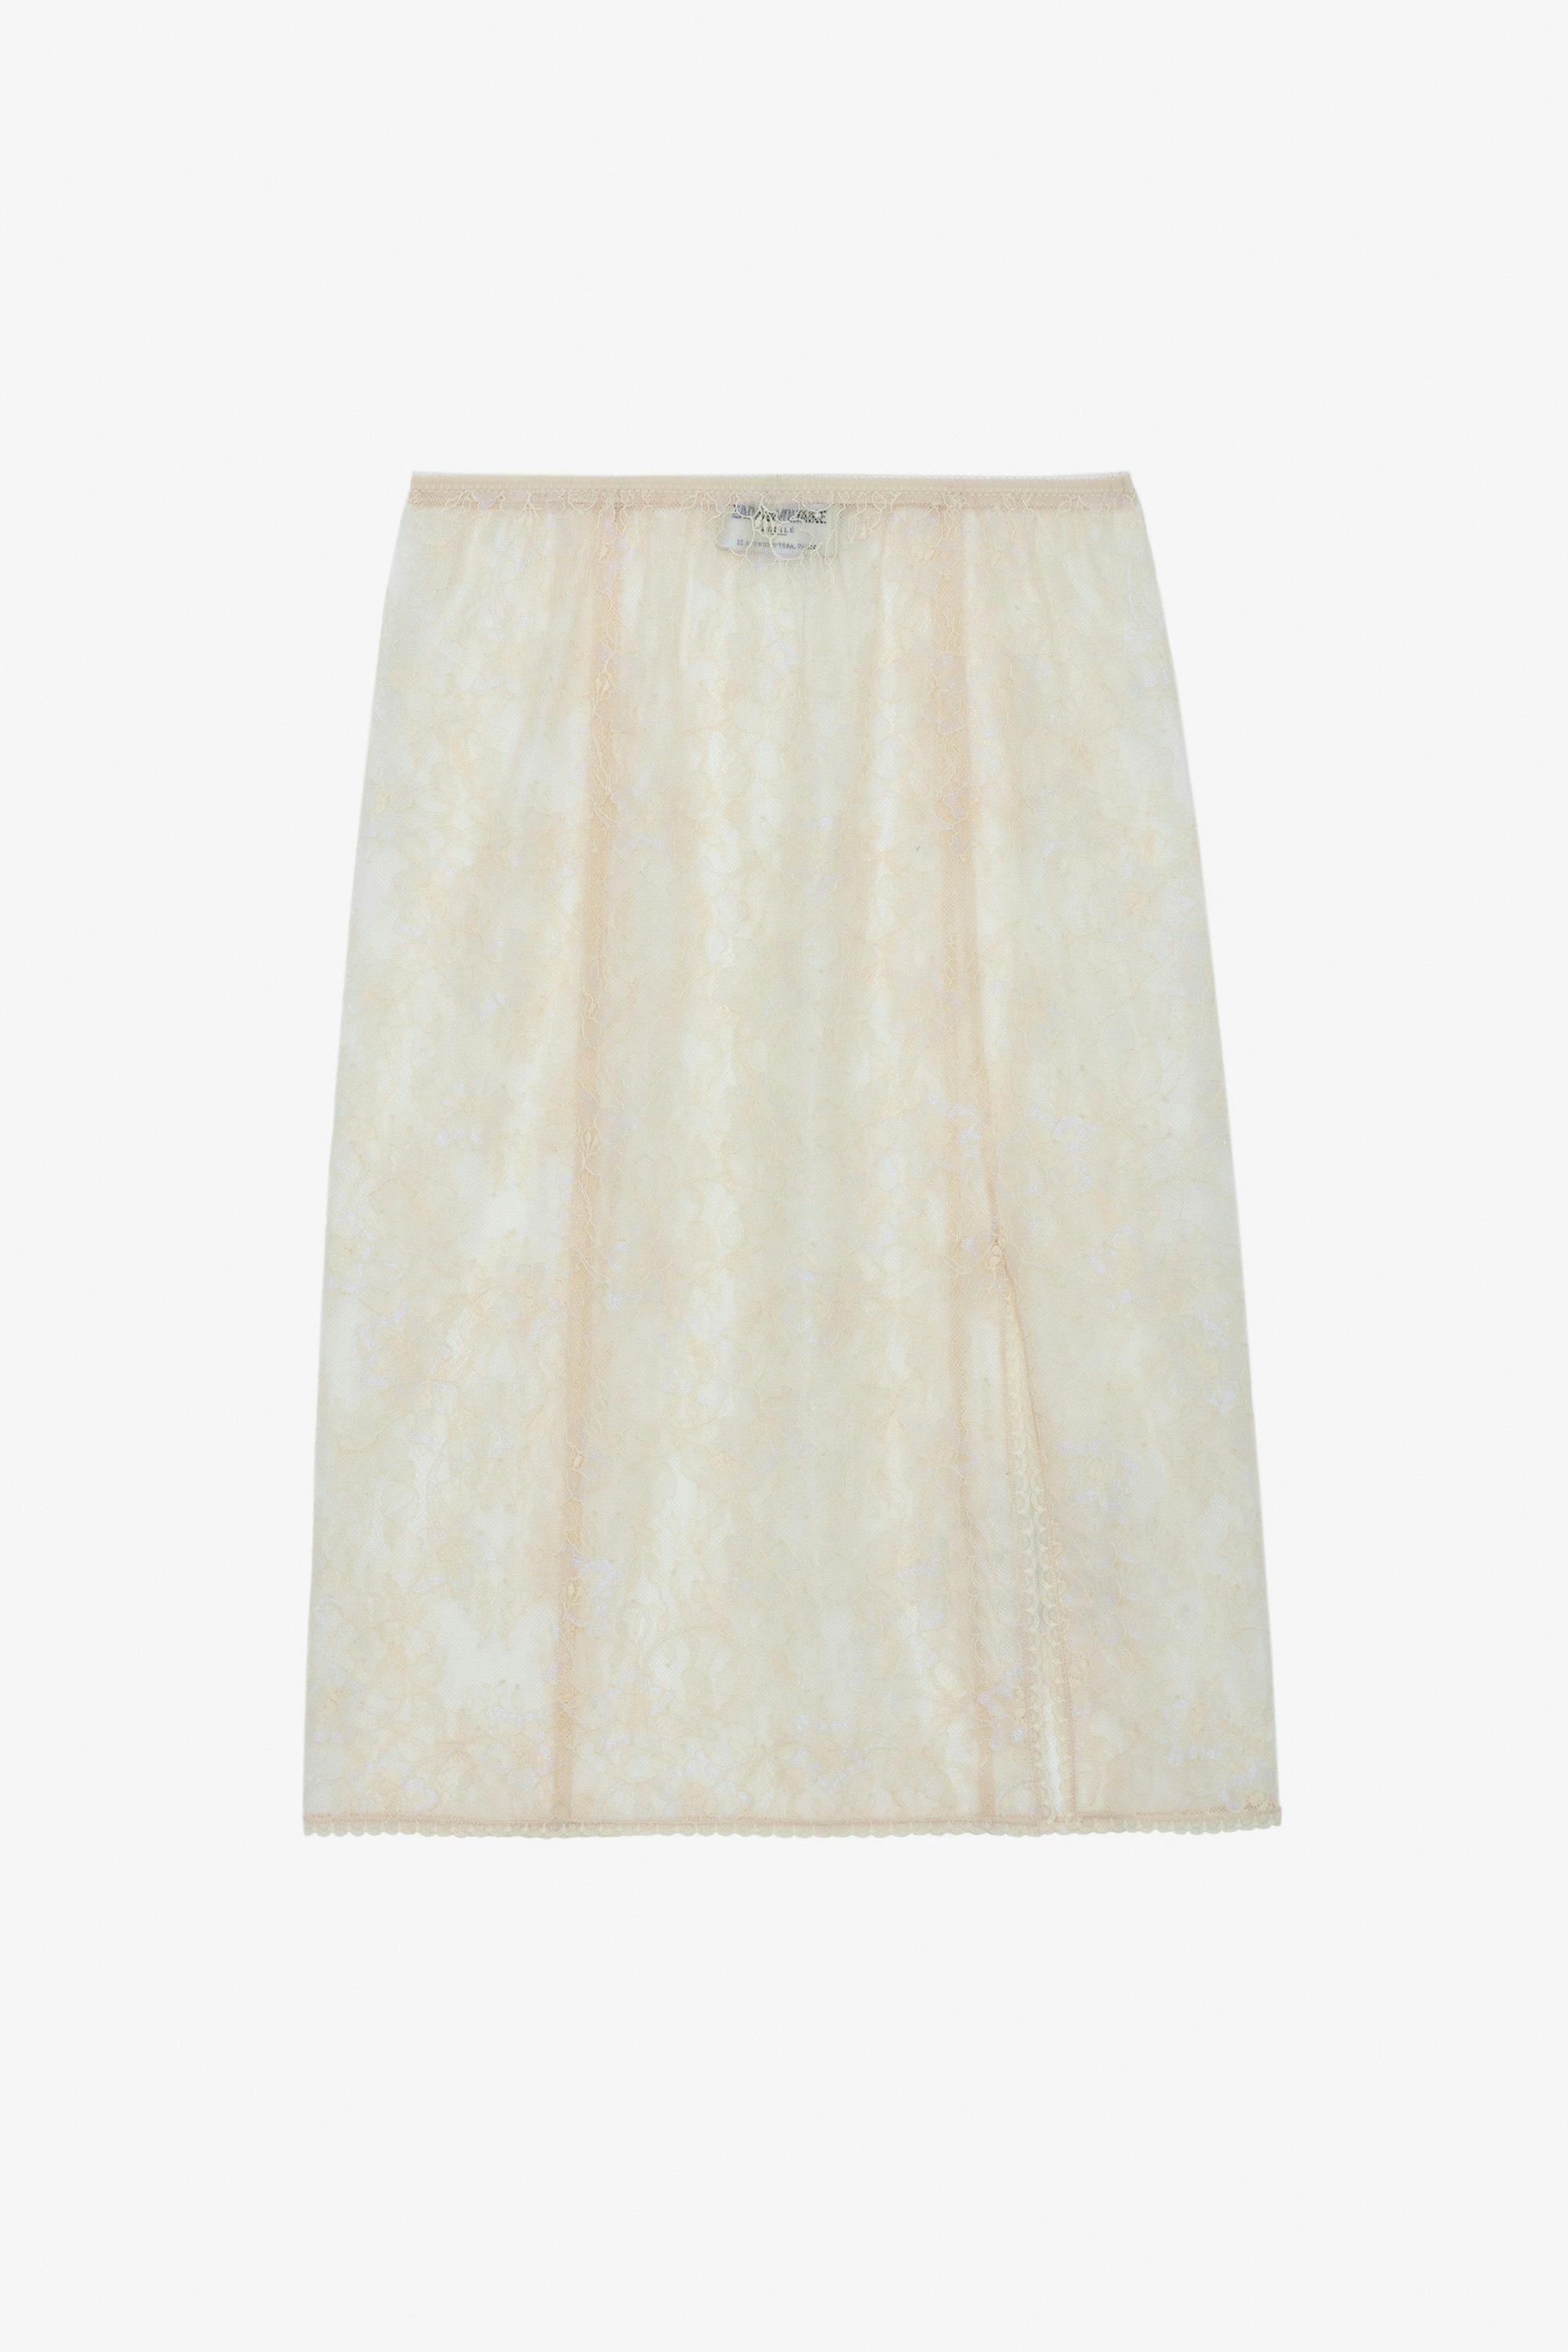 Justicia Skirt - Ecru lingerie-style midi skirt with floral lace.